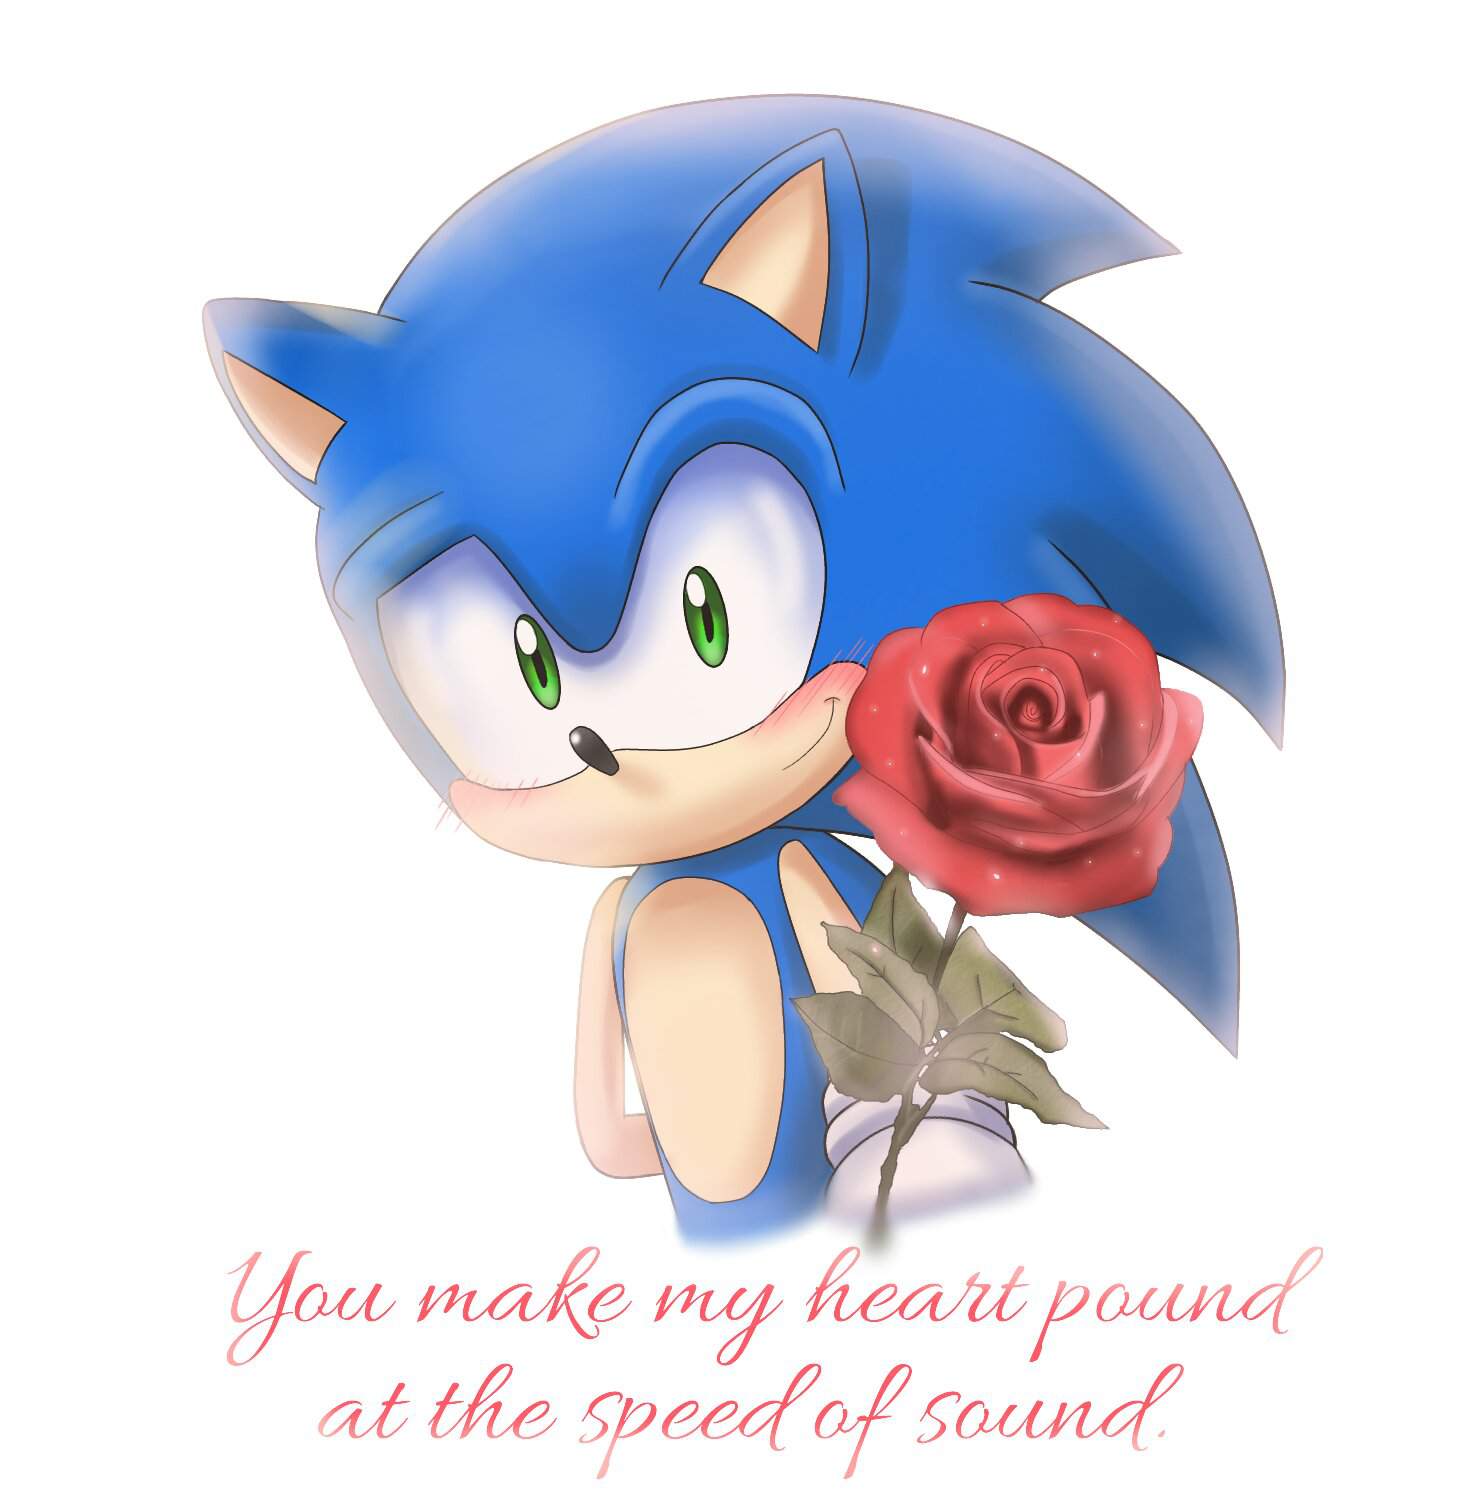 Sonic Valentine's day card - (sorry I'm late) Sonic the Hedgehog!...